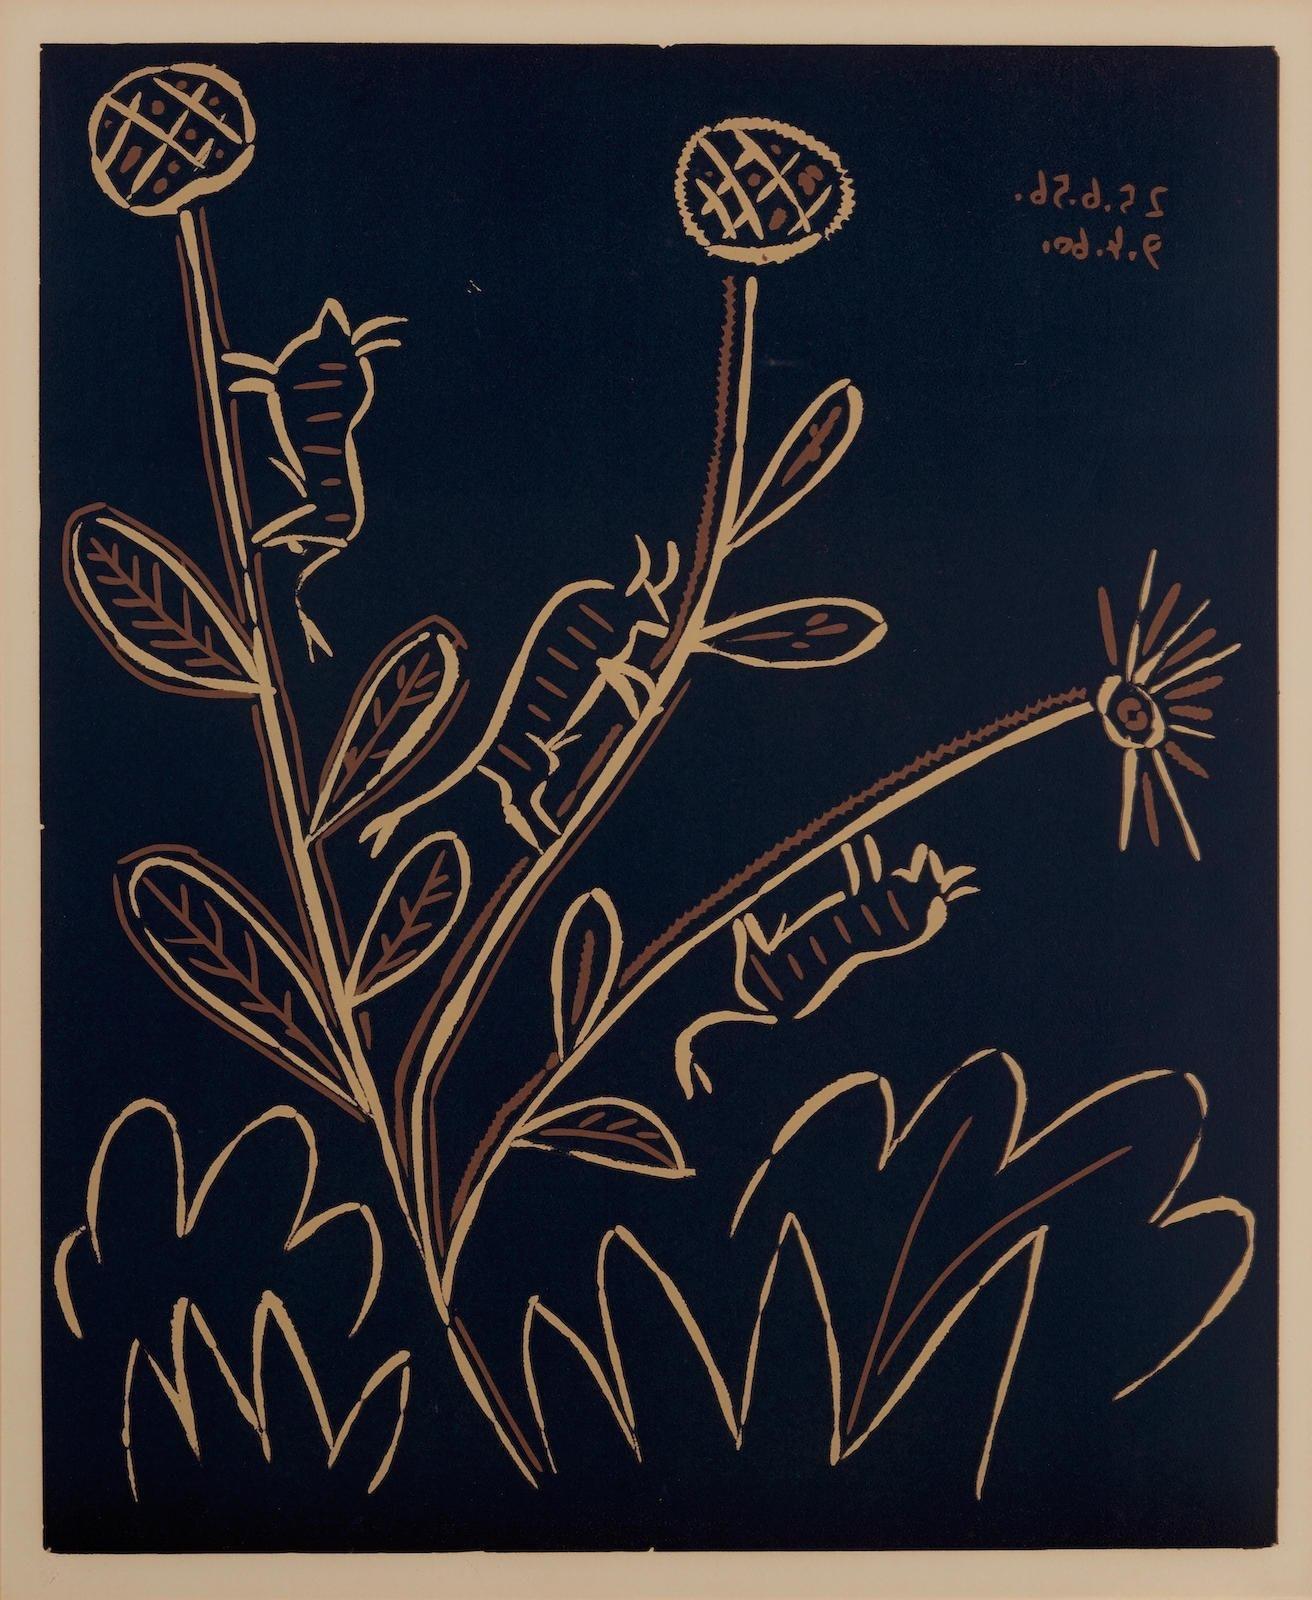 Picasso, Plant with Little Bulls, Pablo Picasso-Linogravures (after) For Sale 4